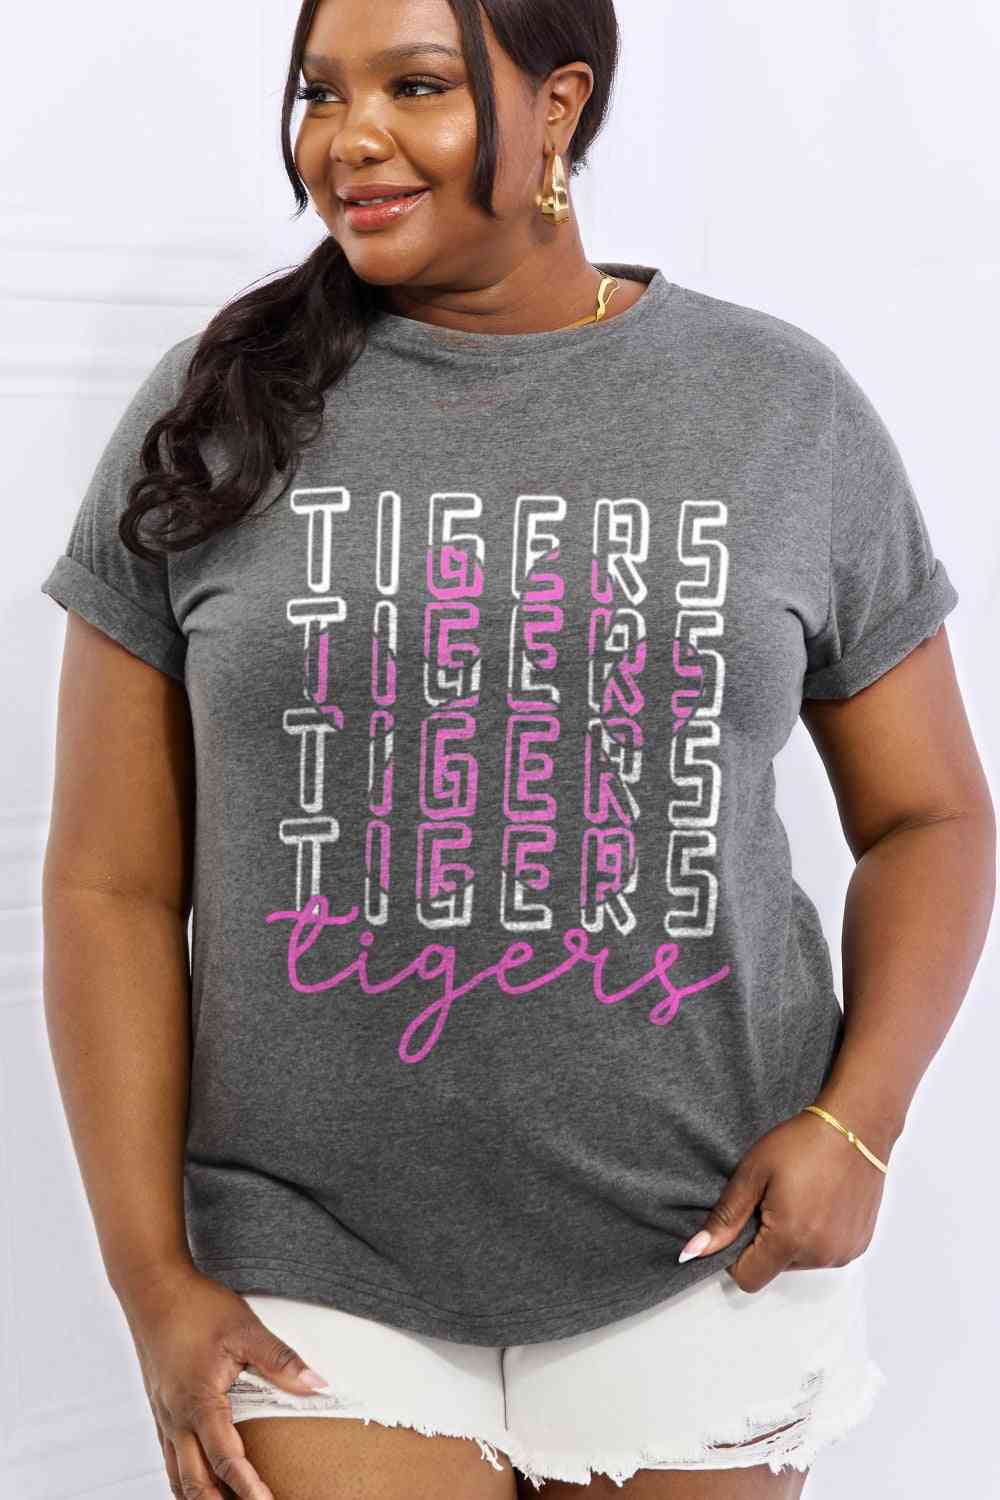 Simply Love Full Size TIGERS Graphic Cotton Tee